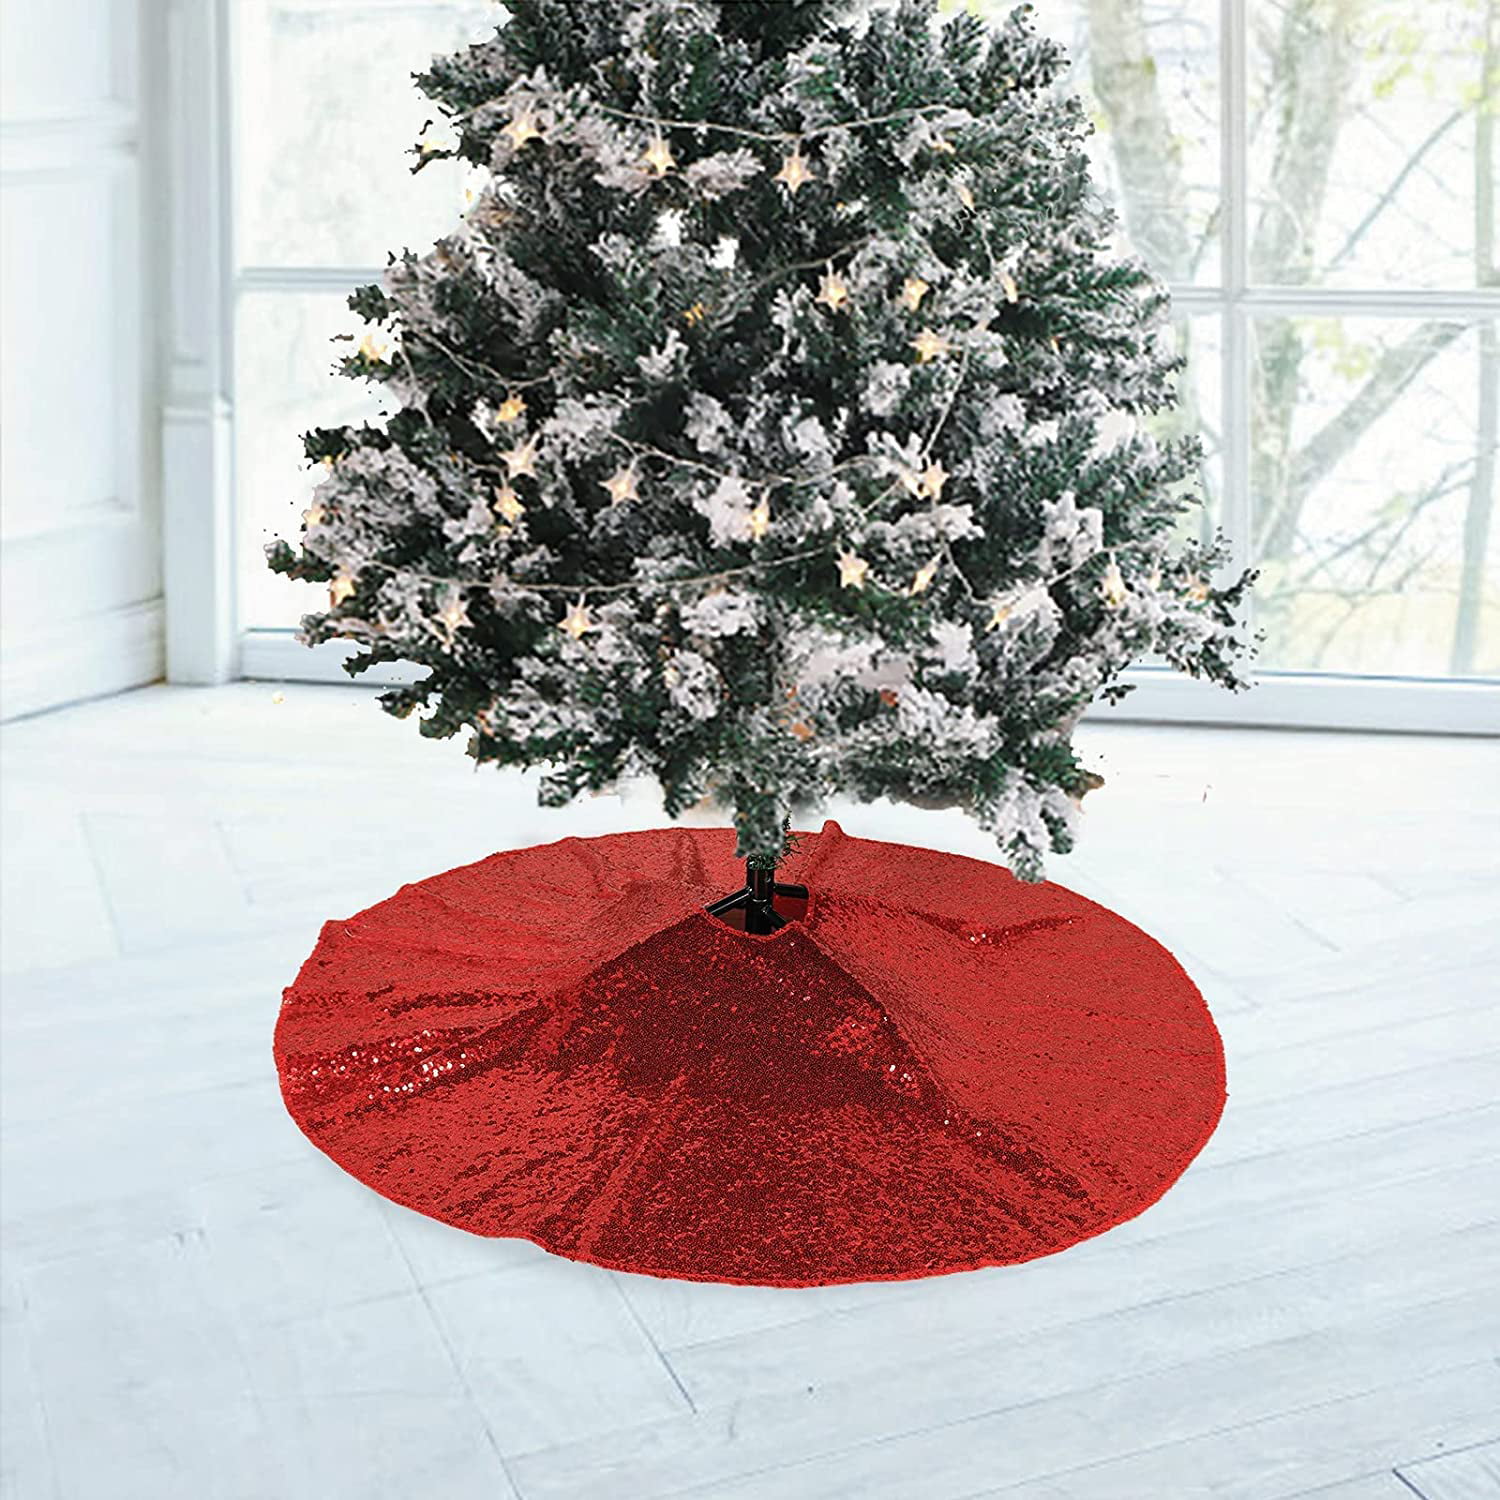 Details about   Christmas Tree Skirt Mat Party Snow Mat Cover Home Party Xmas Decor 36 48 inch 